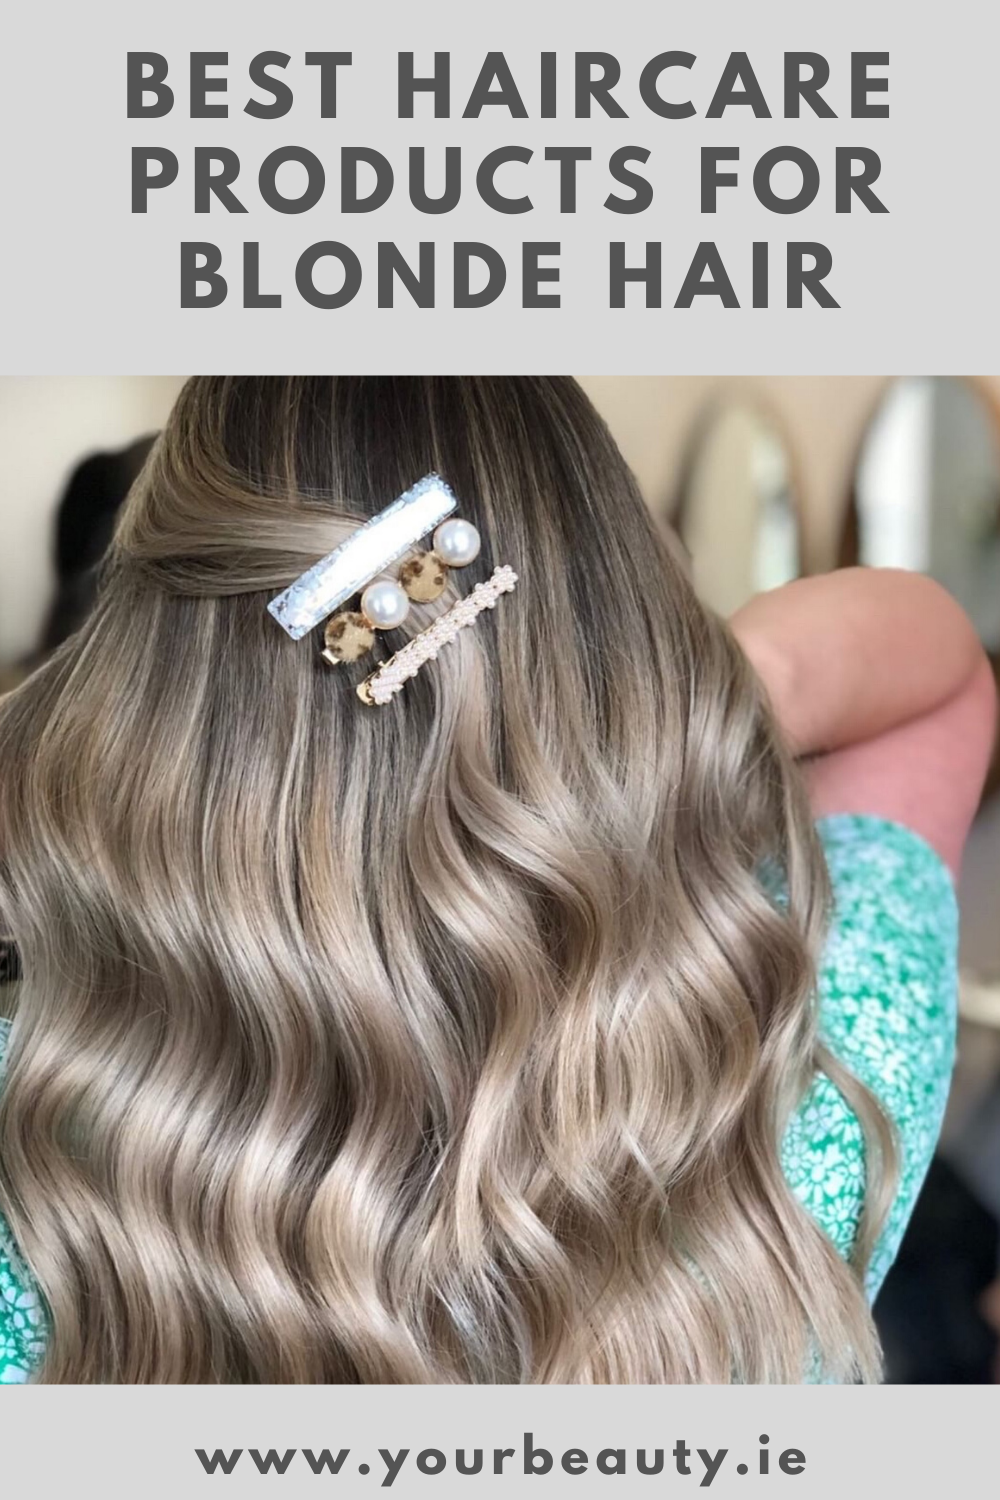 Best Haircare Products for Blonde Hair 2020 - Your Beauty